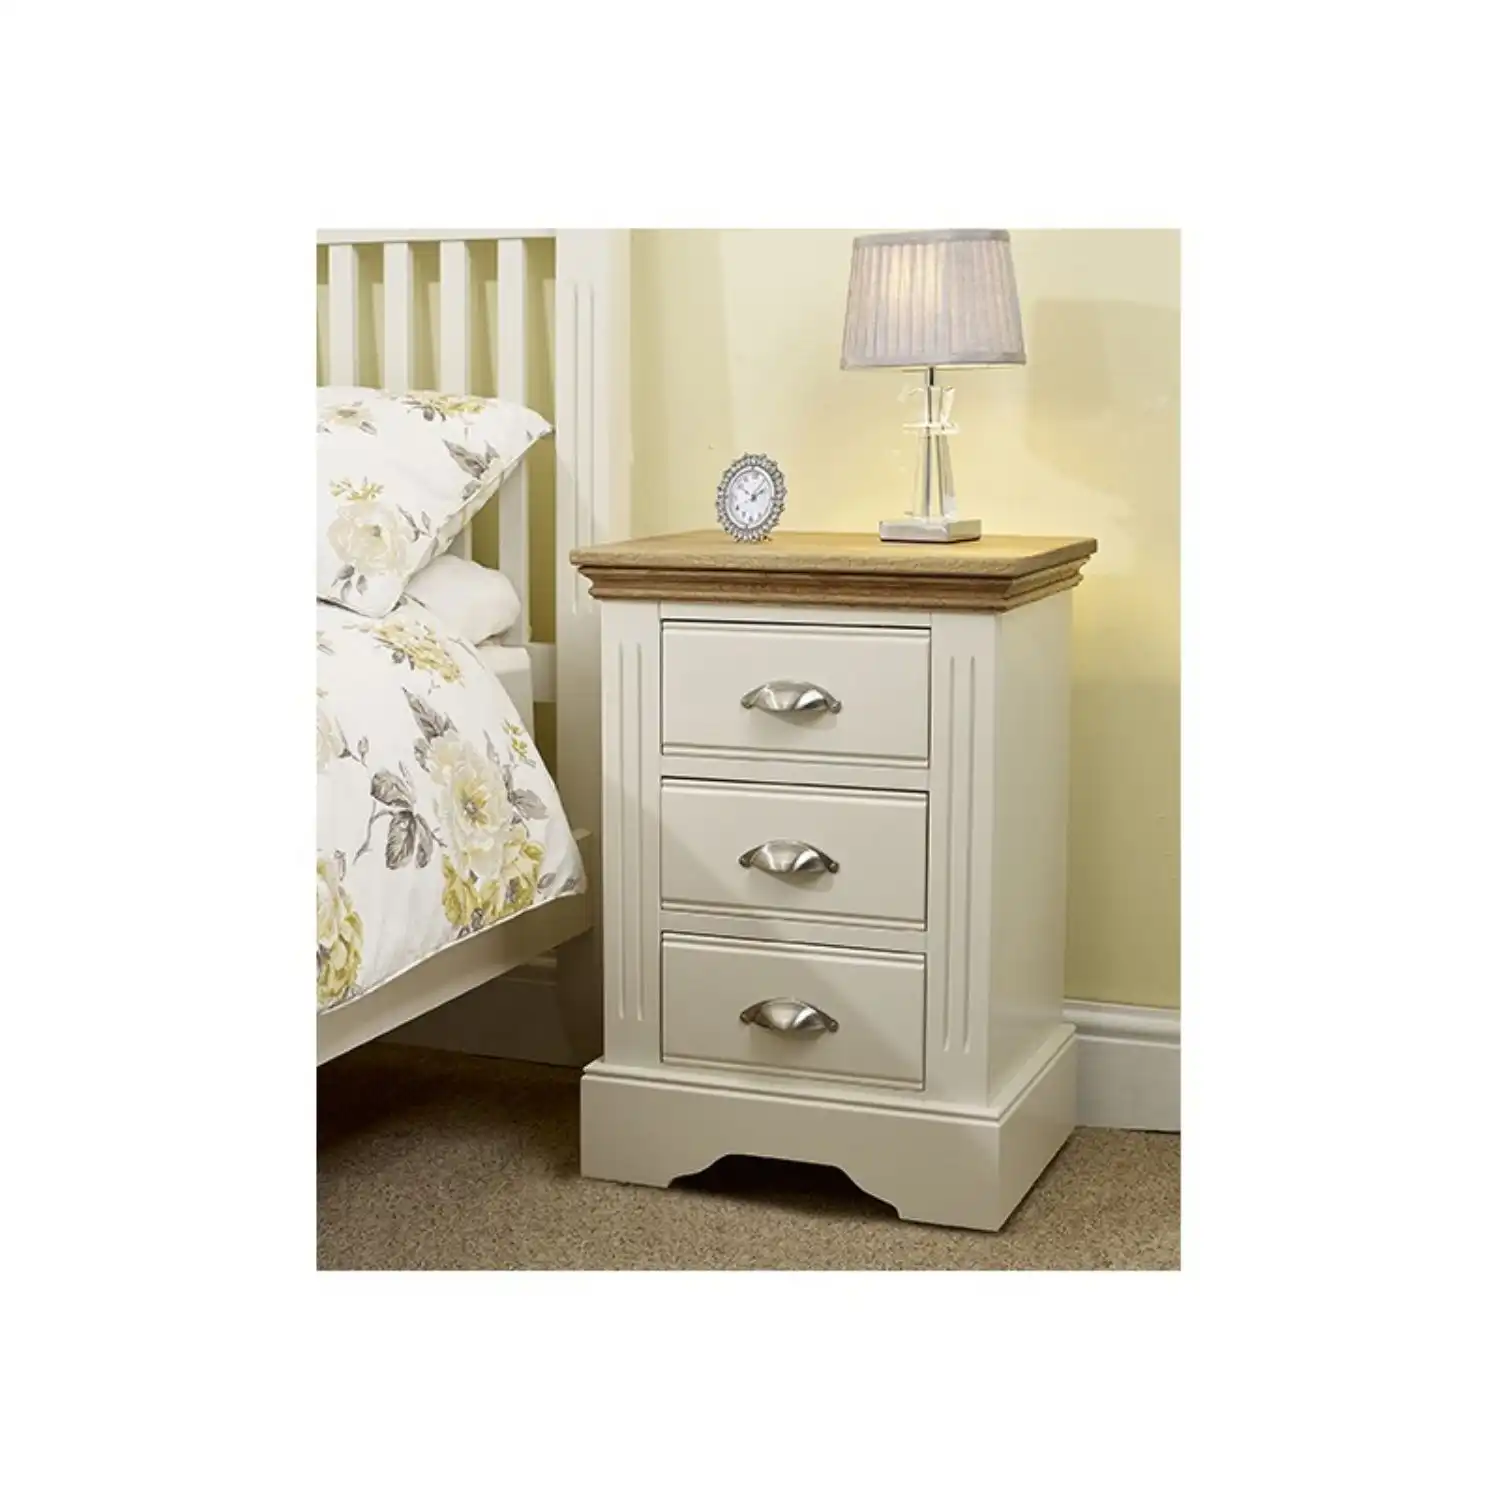 Kent Painted And Solid Oak Top 3 Drawer Bedside Table